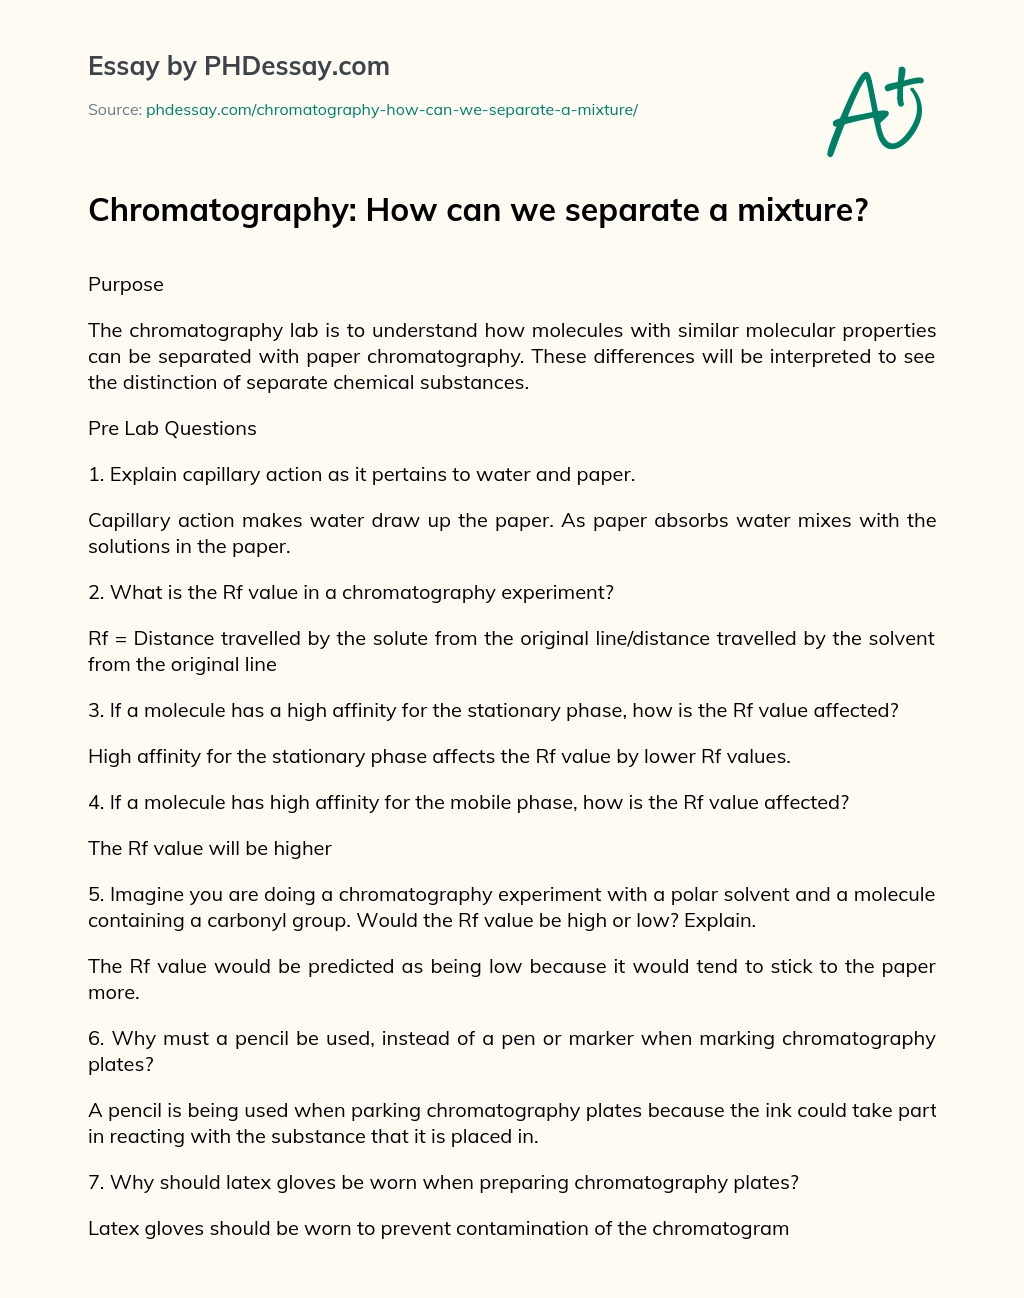 ﻿Chromatography: How can we separate a mixture? essay